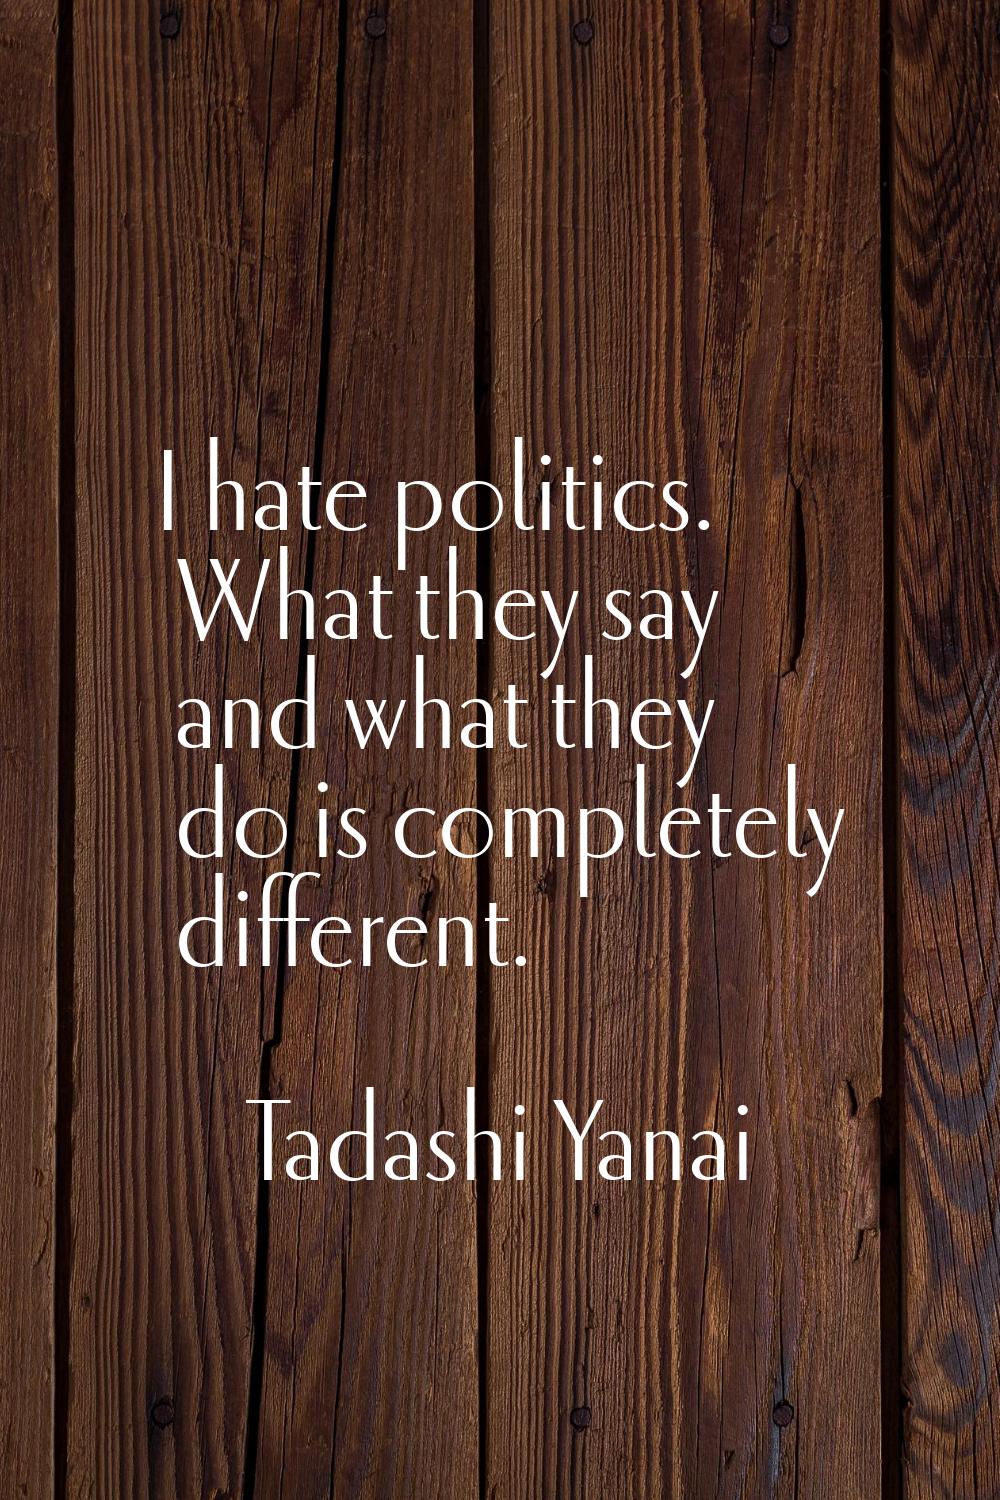 I hate politics. What they say and what they do is completely different.